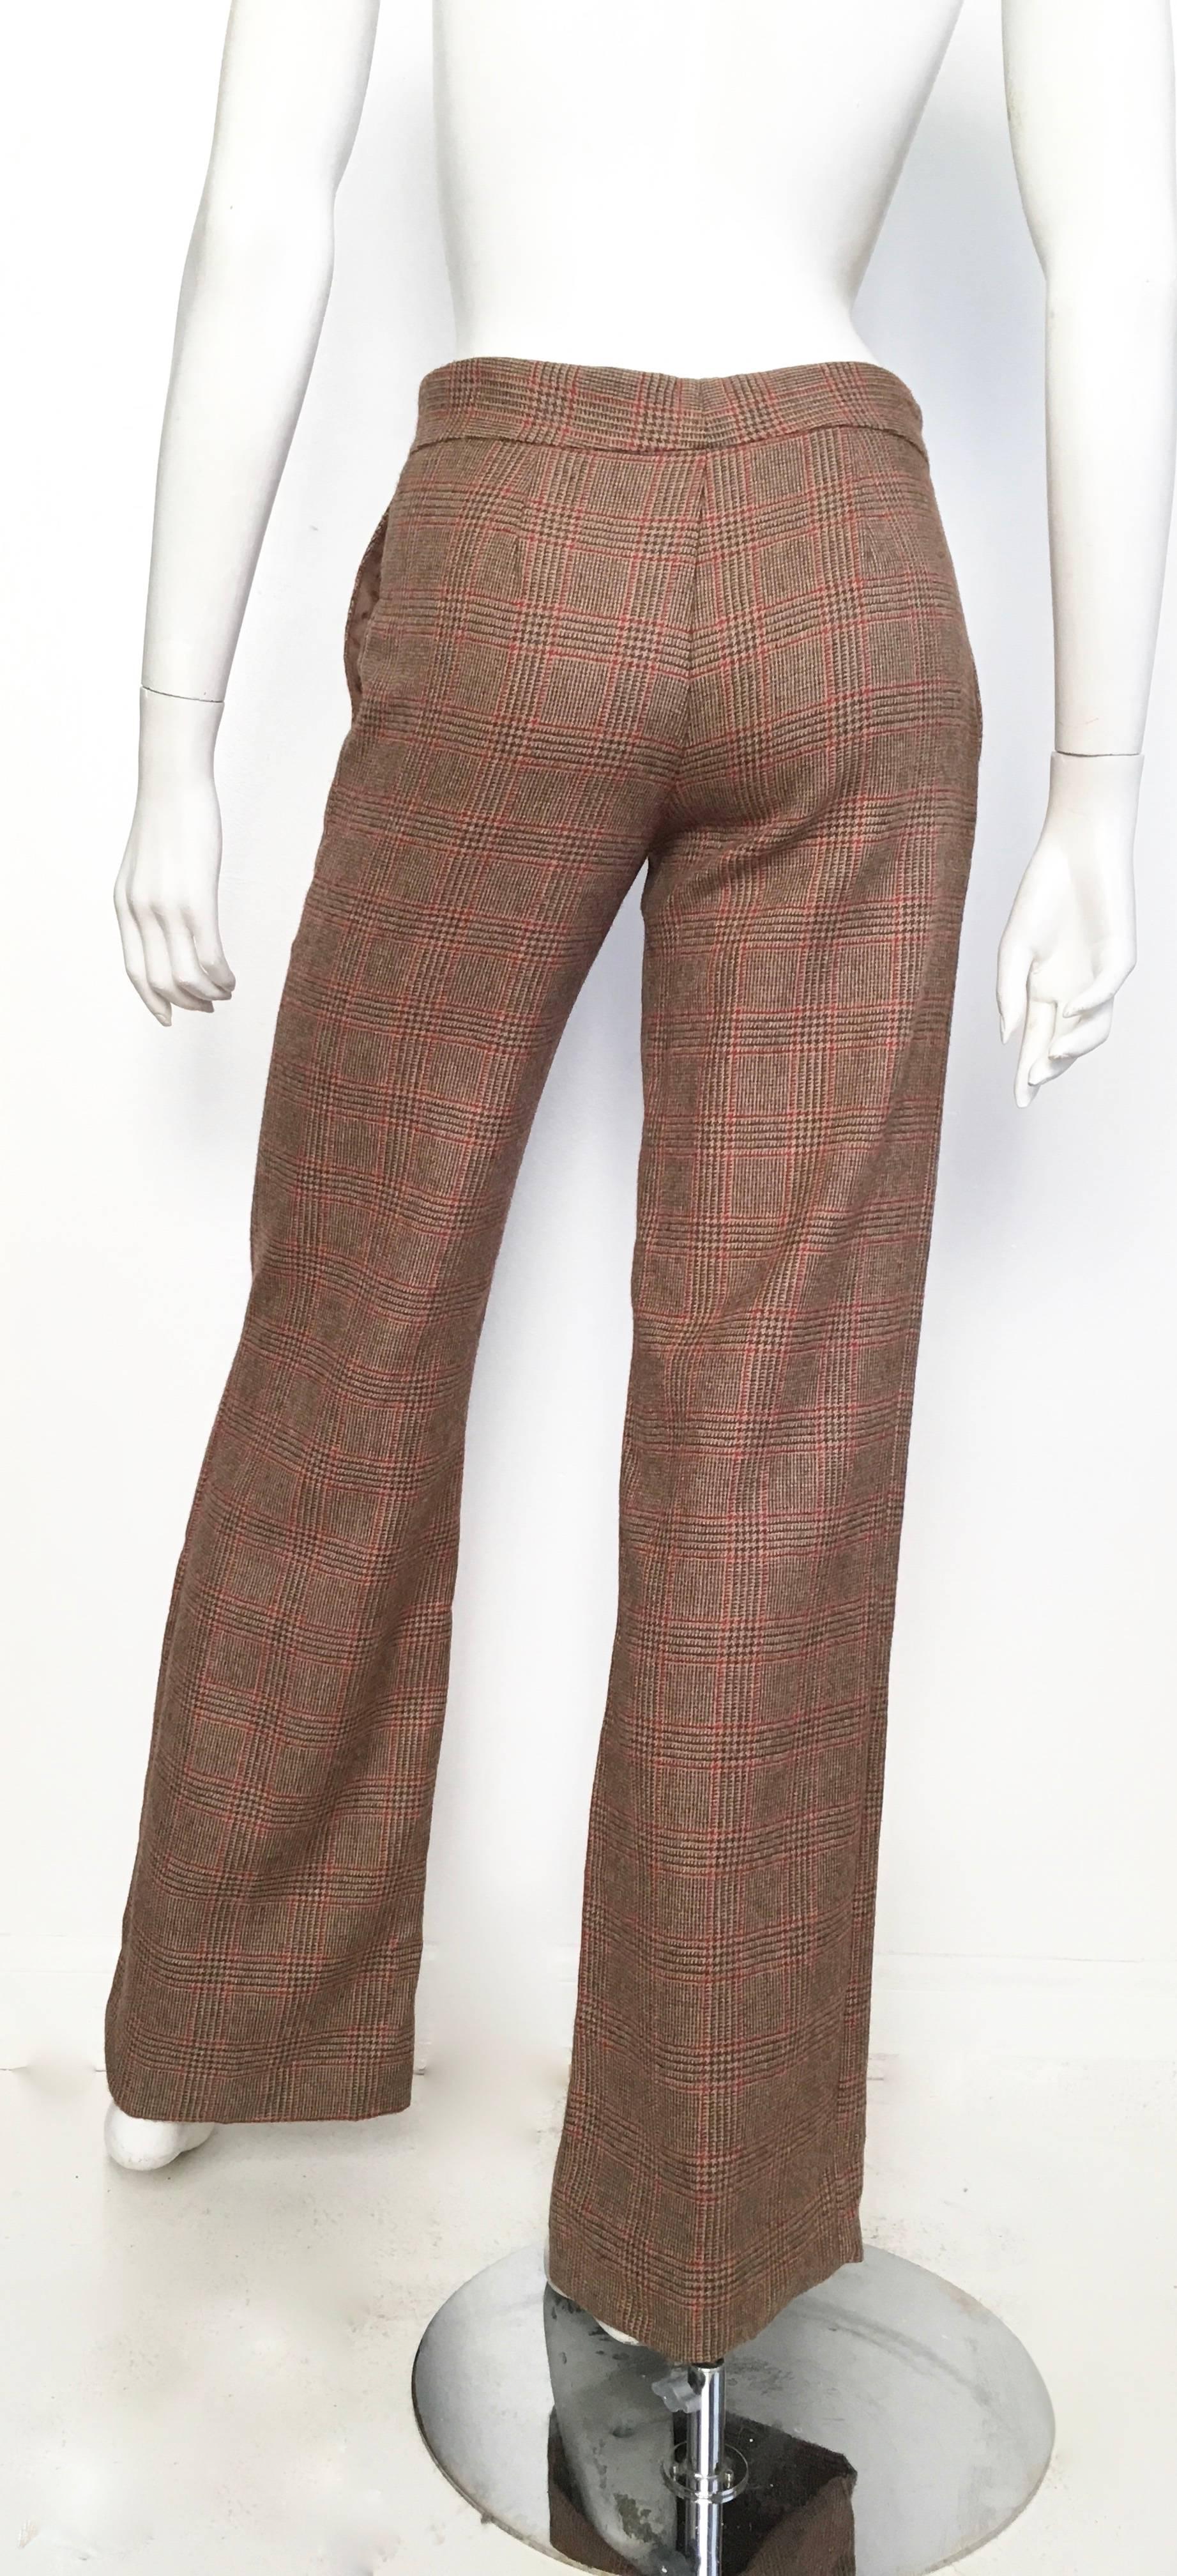 Blumarine Glen Plaid Wool Pants with Pockets, Size 4  In Excellent Condition For Sale In Atlanta, GA